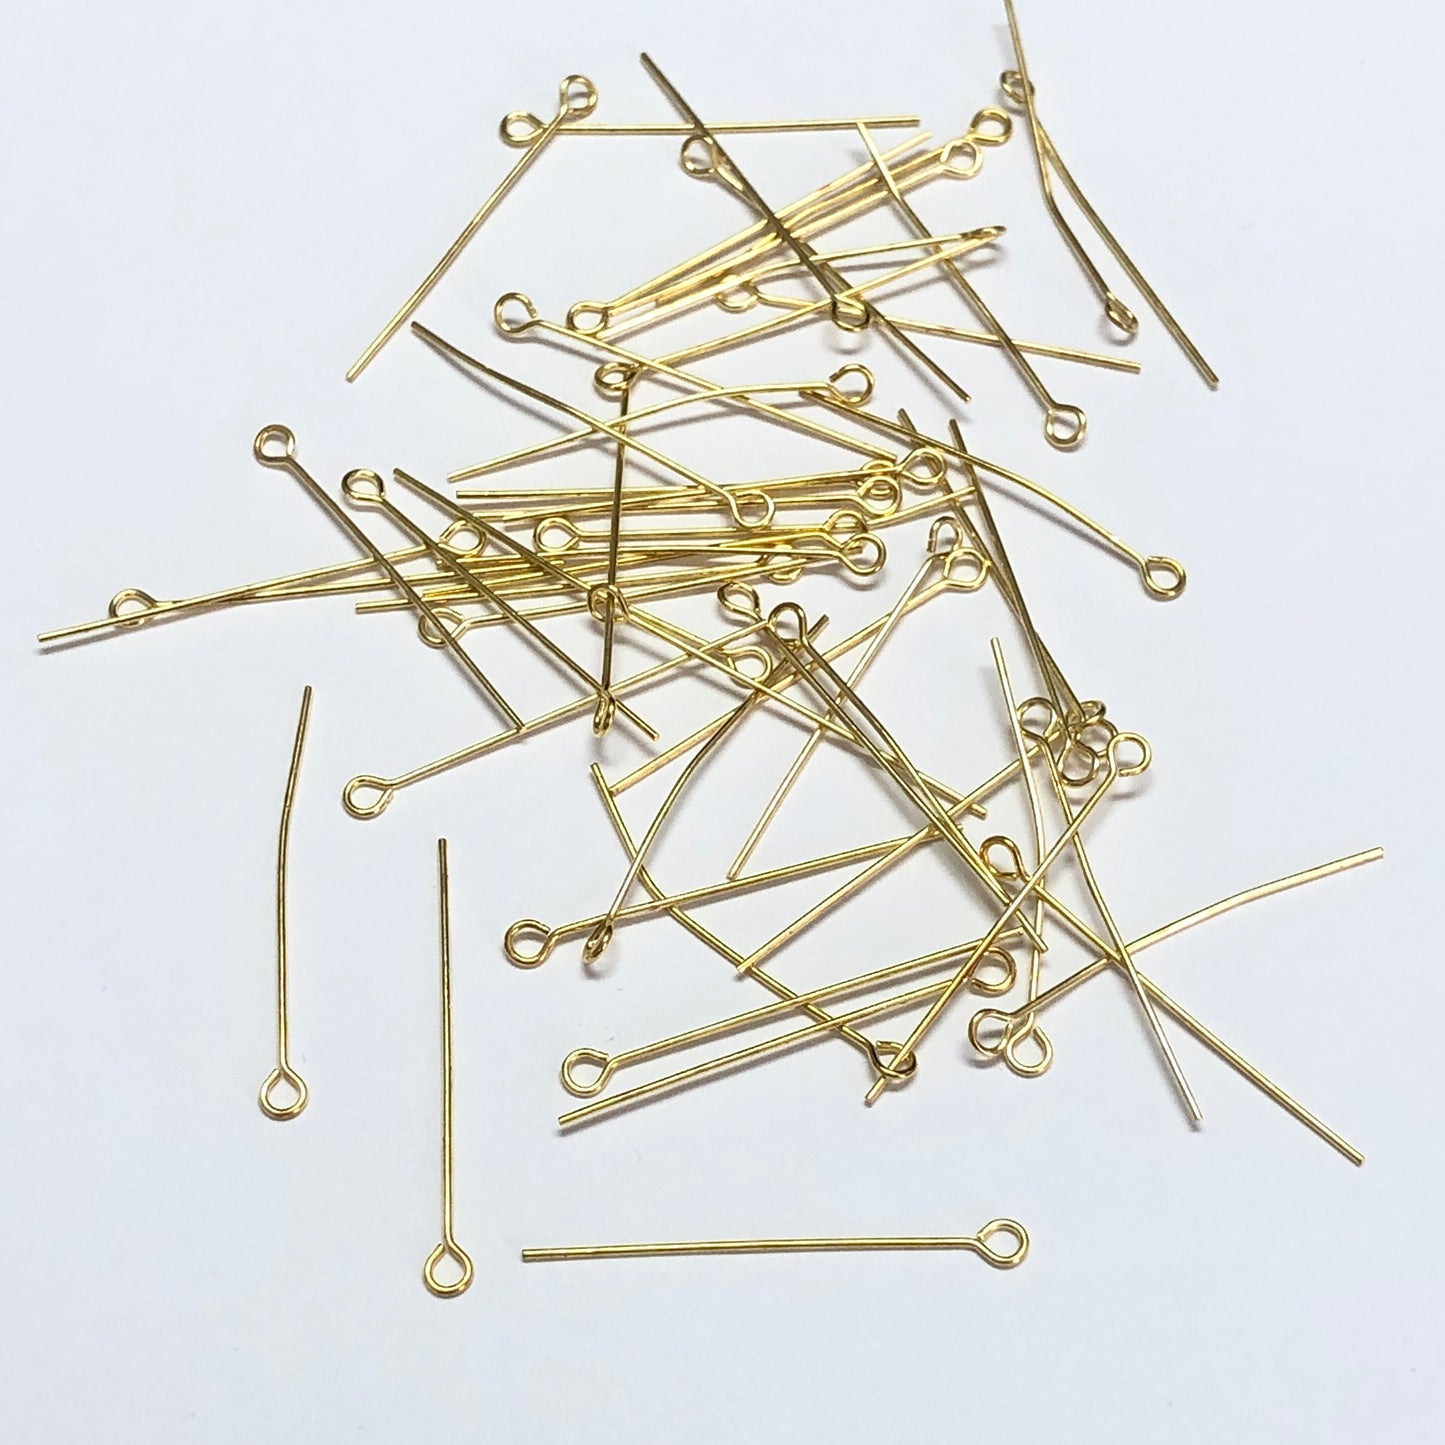 Gold Plated Flat Nails 20 MM